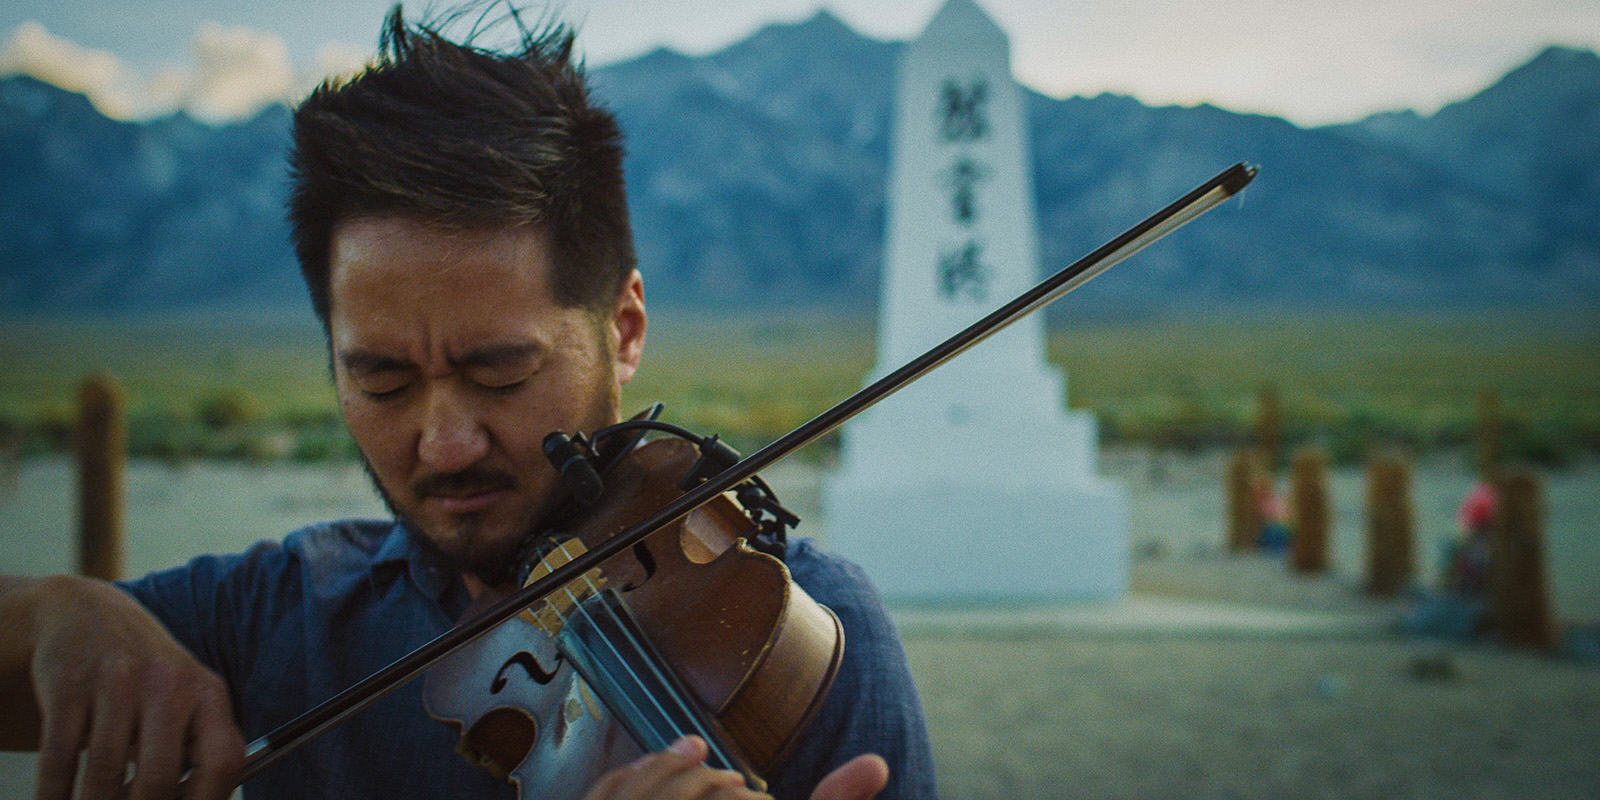 Indie Musician Kishi Bashi to Perform with the UGA Symphony Orchestra